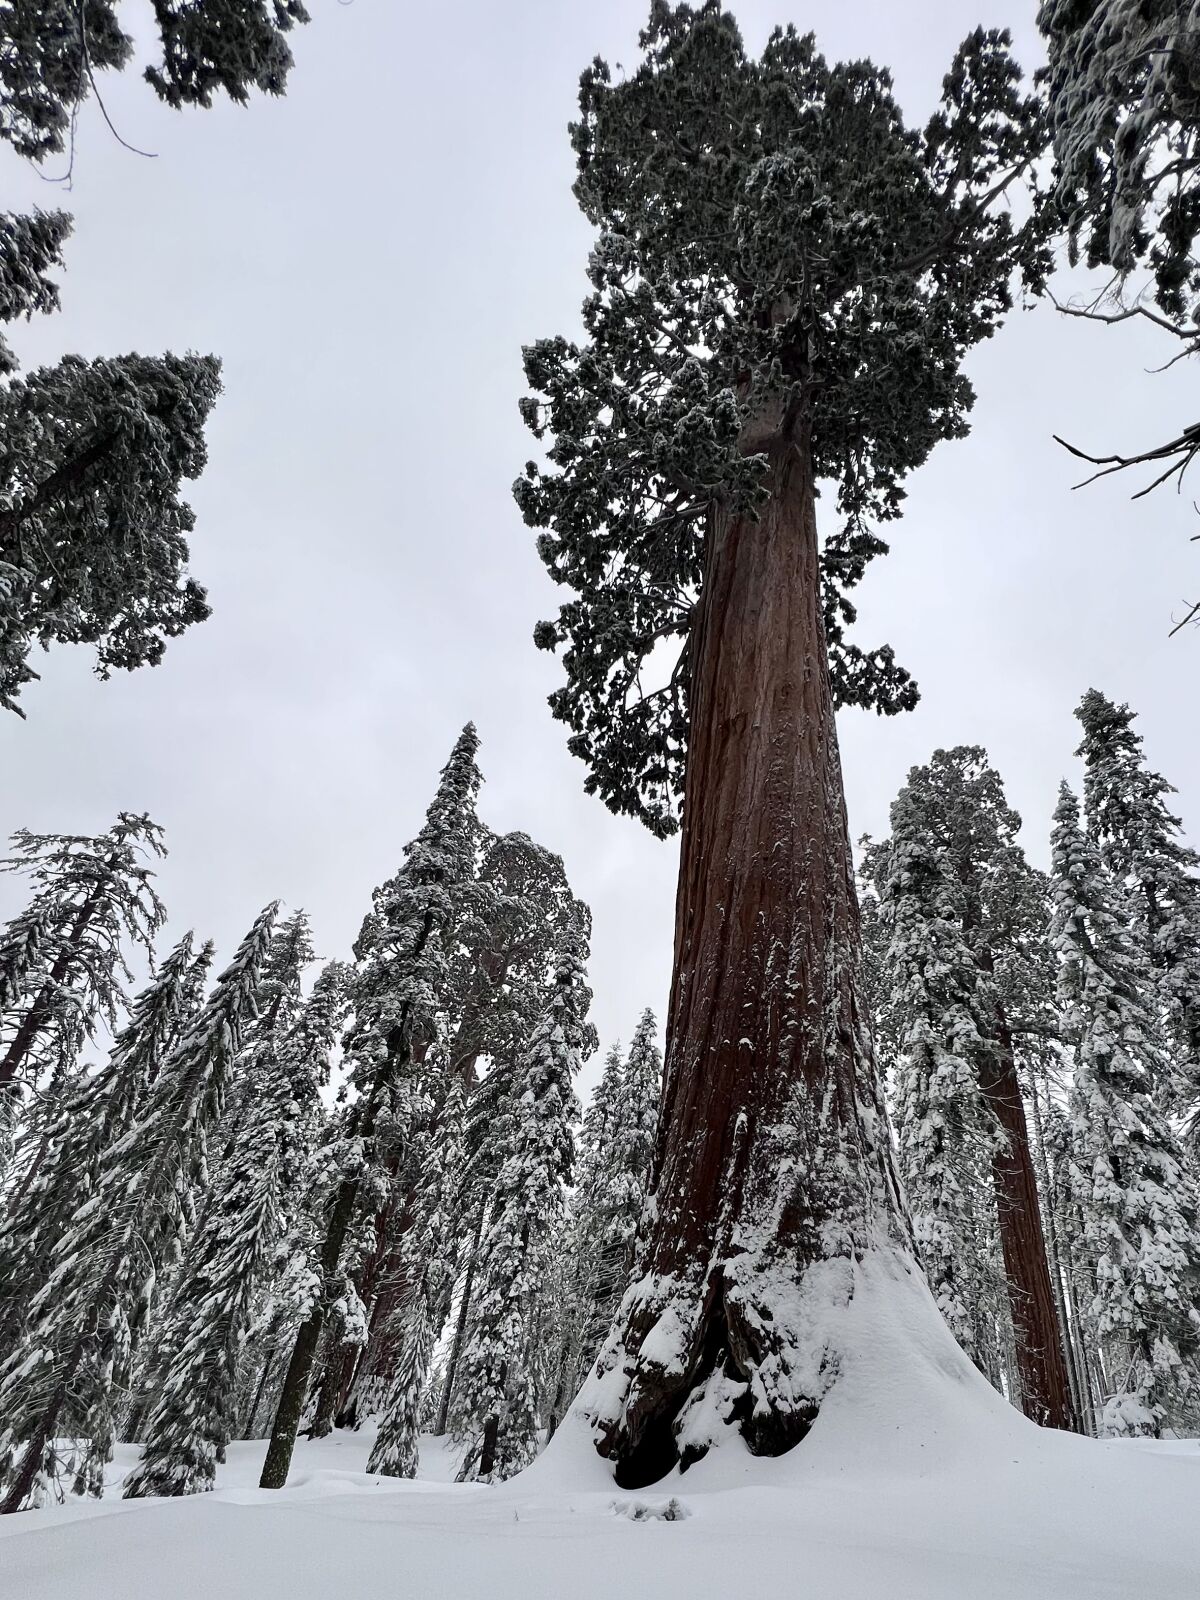 A massive sequoia tree in a snowy forest.